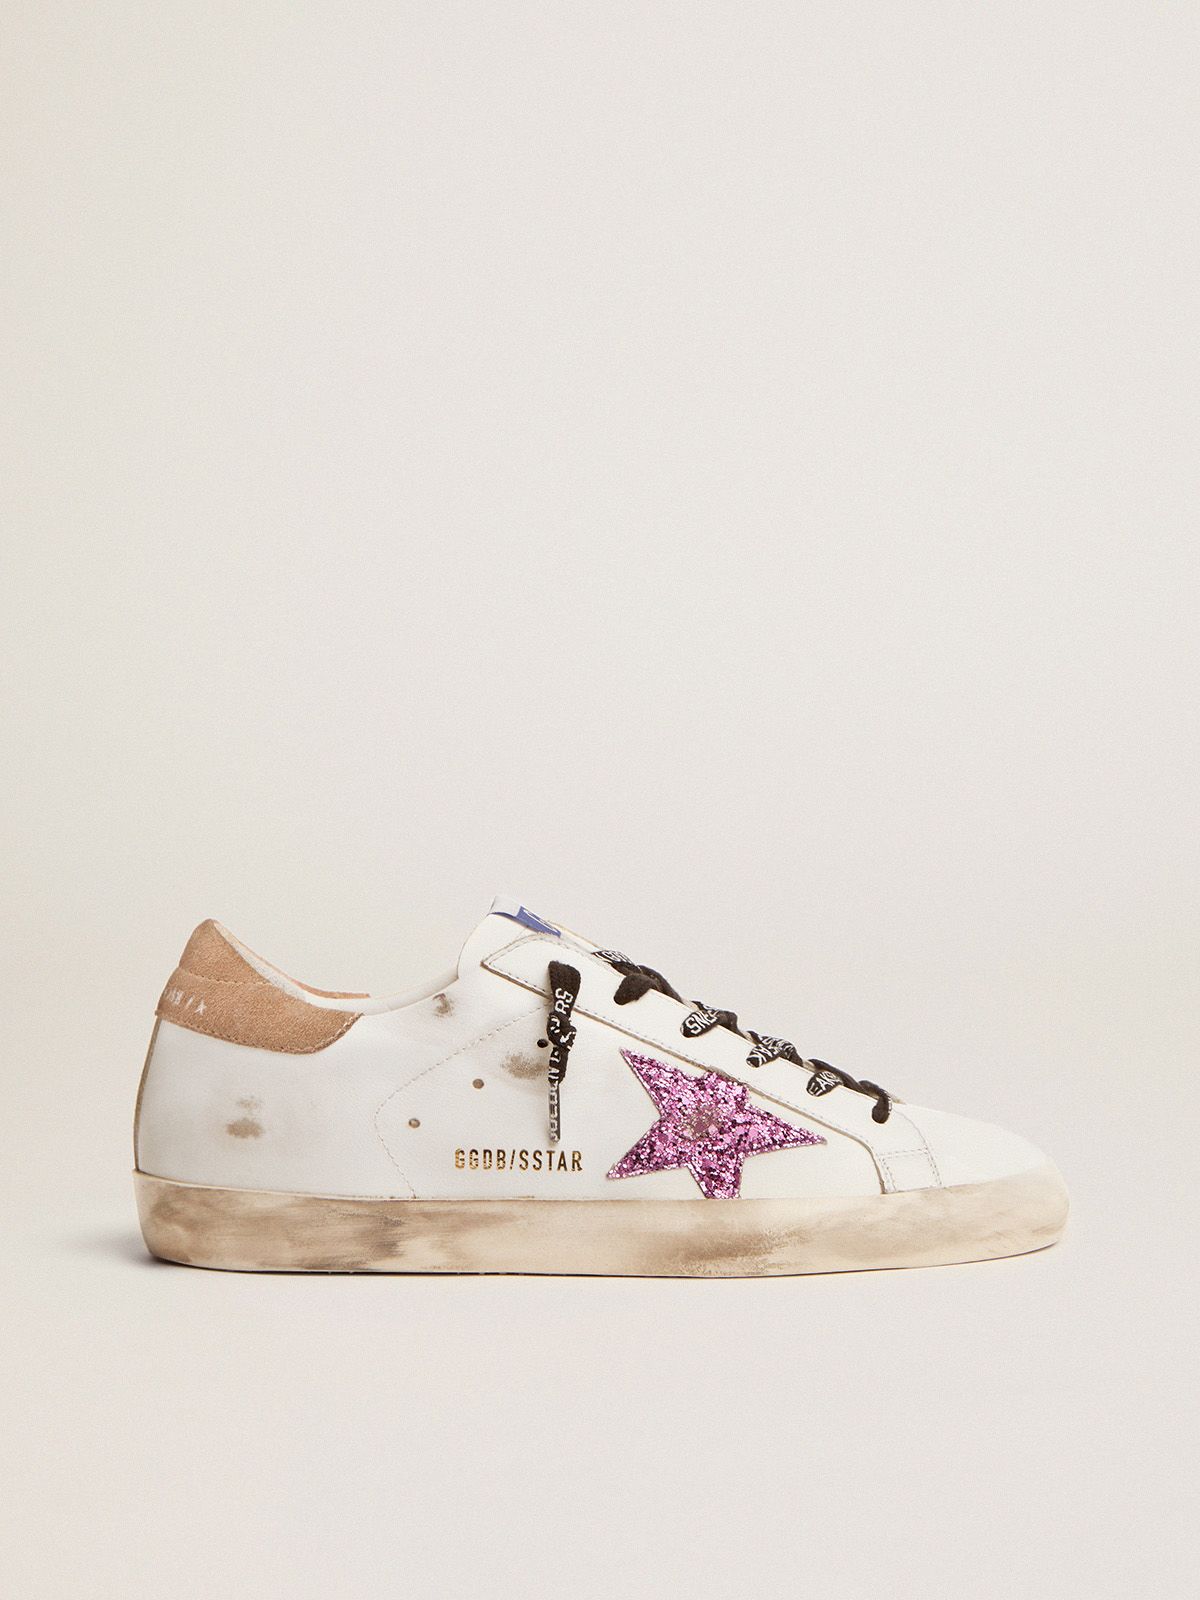 Sneakers Uomo Golden Goose Super-Star sneakers in white leather with lavender-colored glitter star